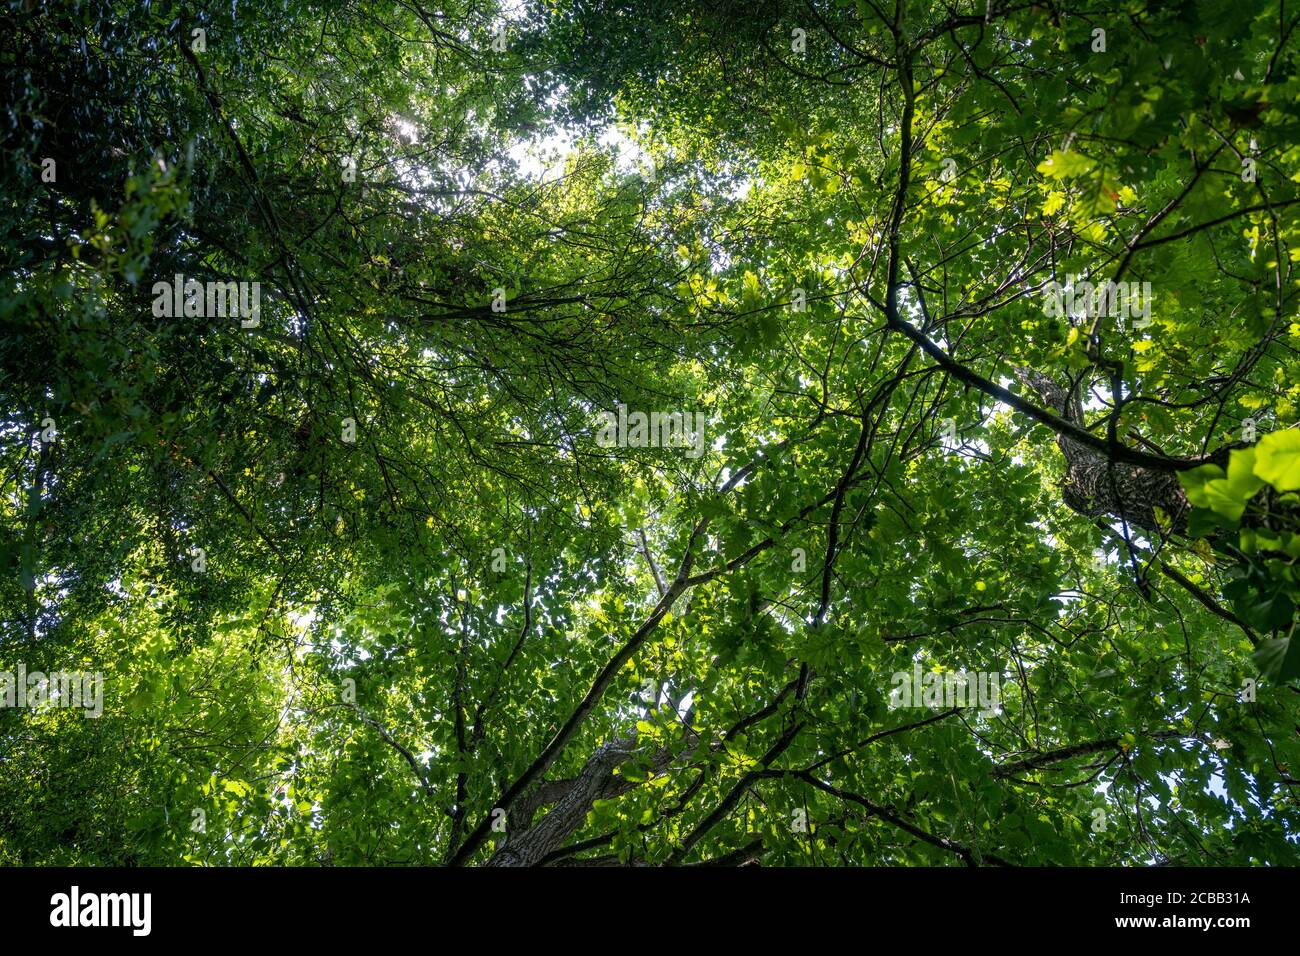 Looking up into the trees on a hot summer day in the UK. Stock Photo